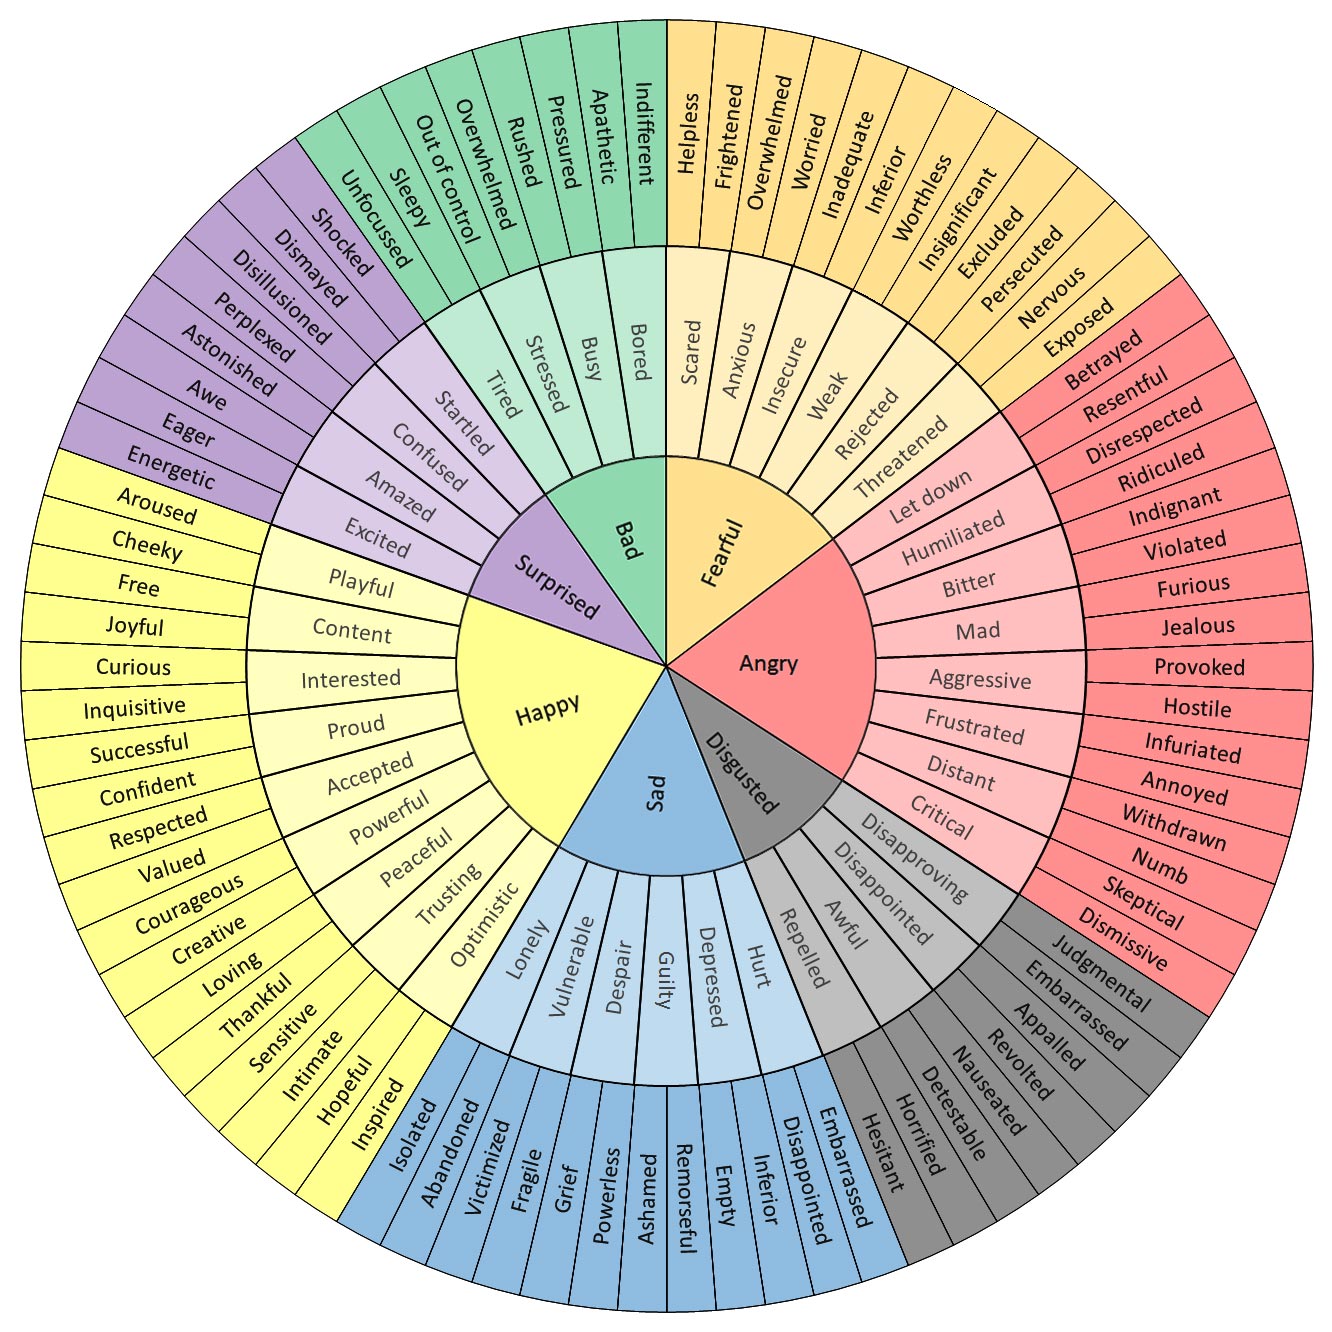 A range of emotions arranged by intensity